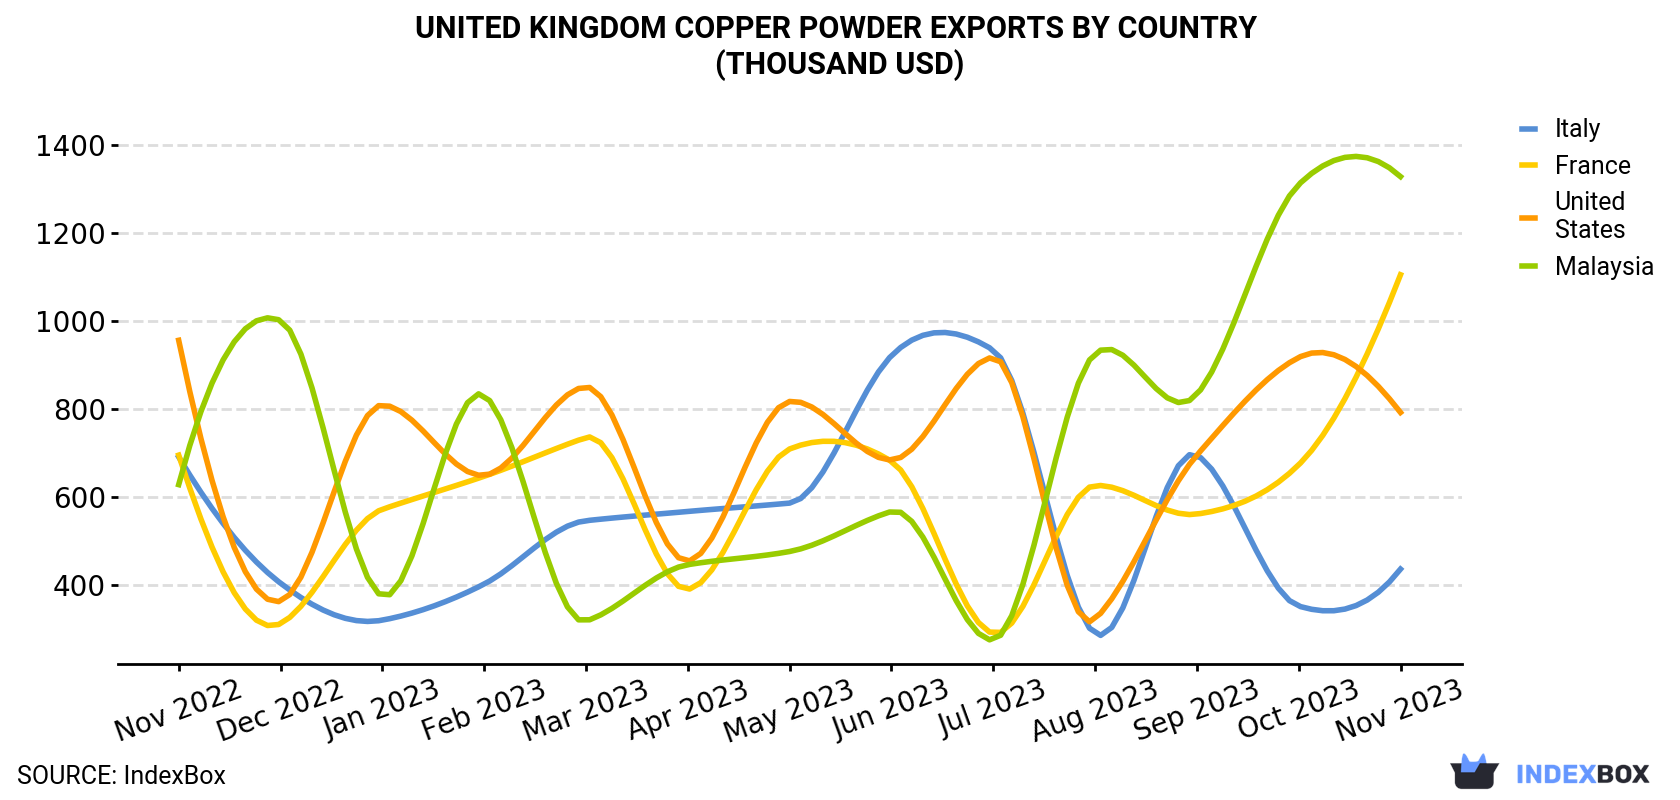 United Kingdom Copper Powder Exports By Country (Thousand USD)